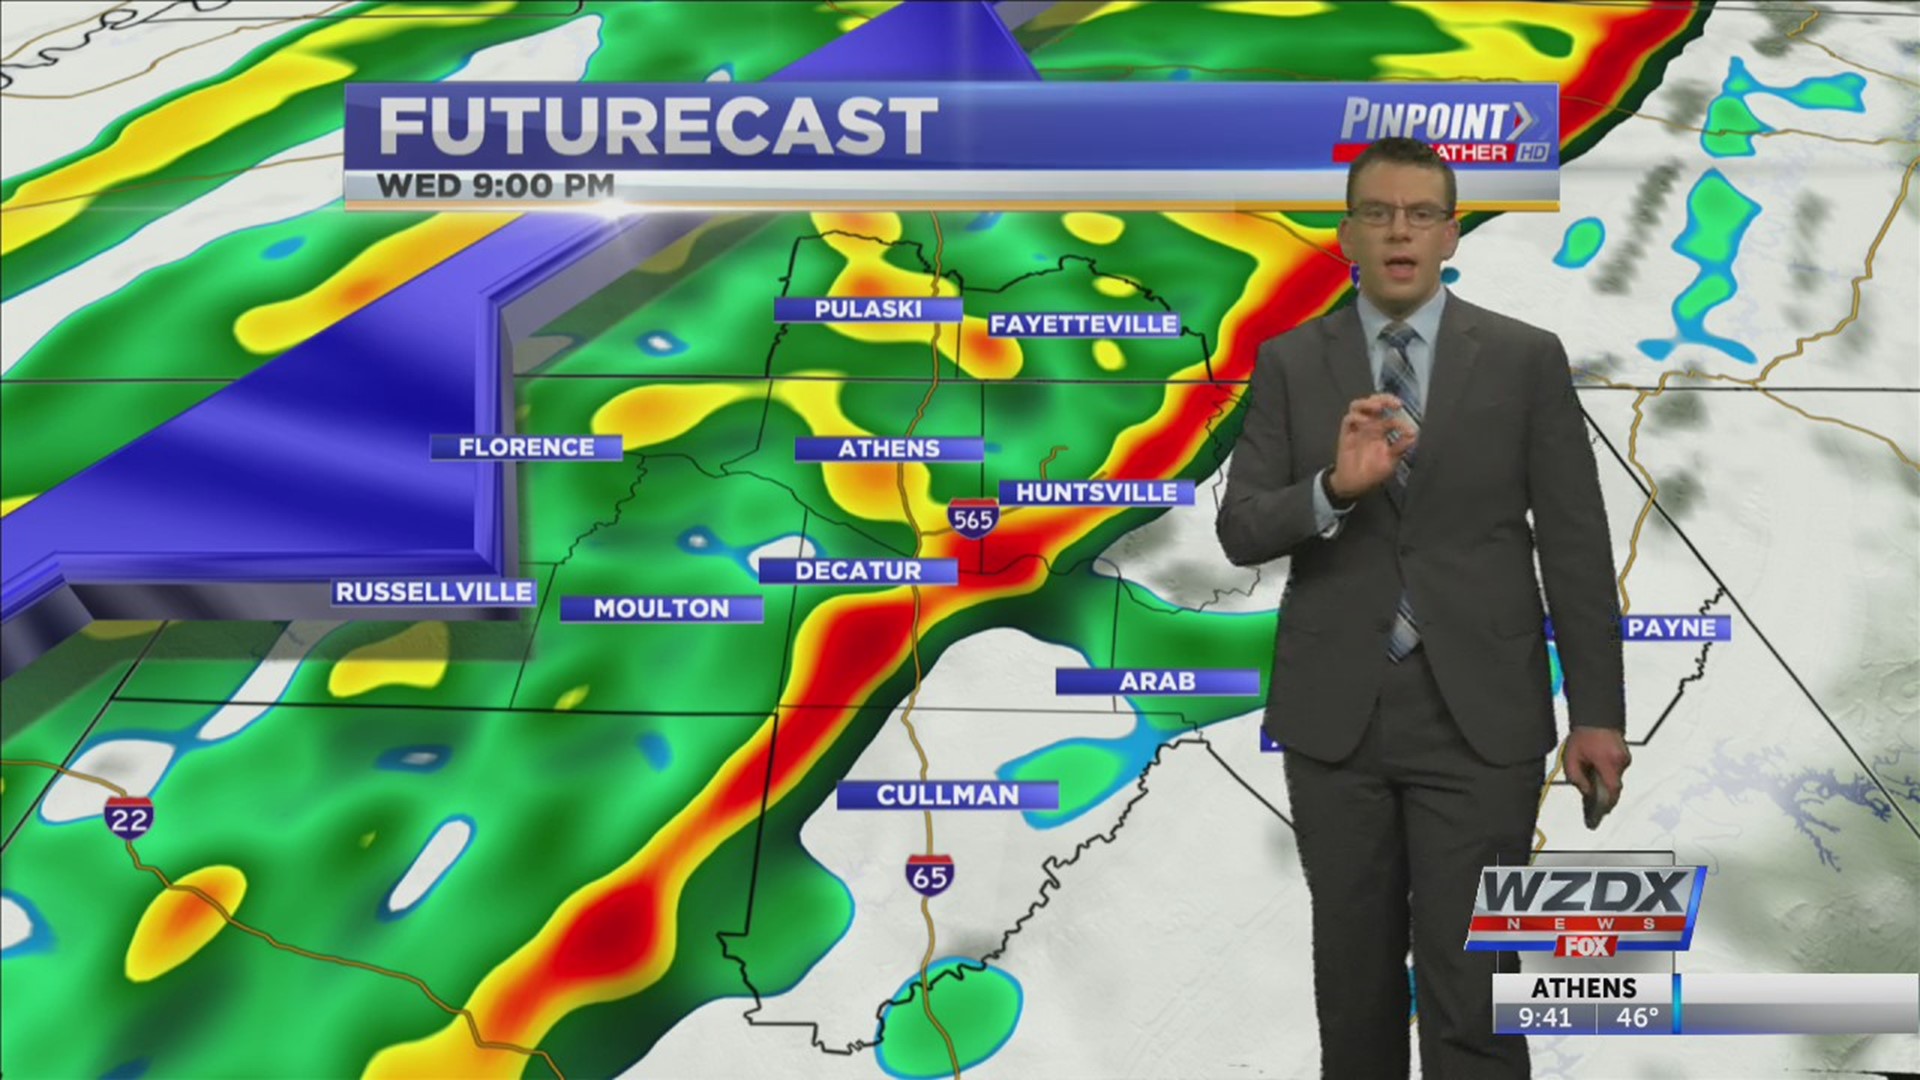 Severe weather and flooding will be the big issues through Wednesday night. Details inside tonight's forecast.